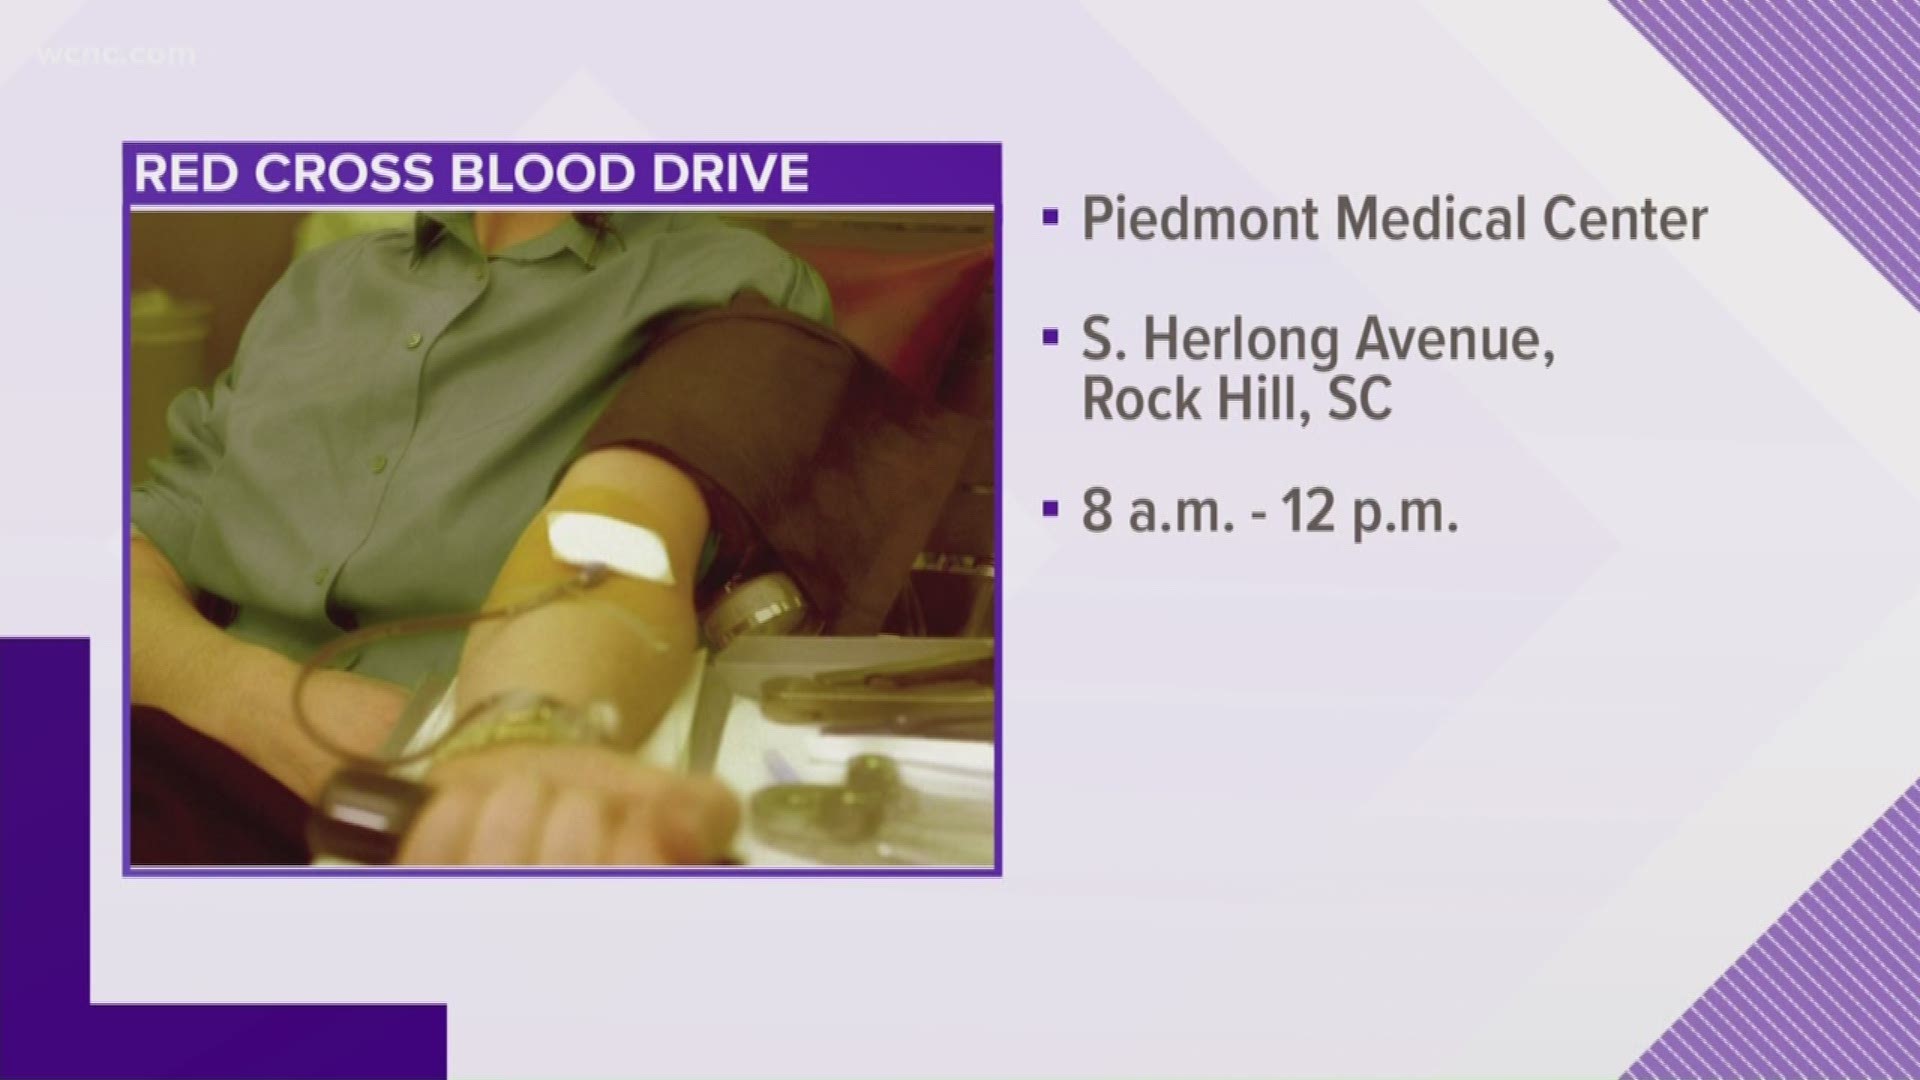 Those interested in helping can donate blood Monday at a blood drive in Rock Hill from 8 a.m. to noon at the Piedmont Medical Center.